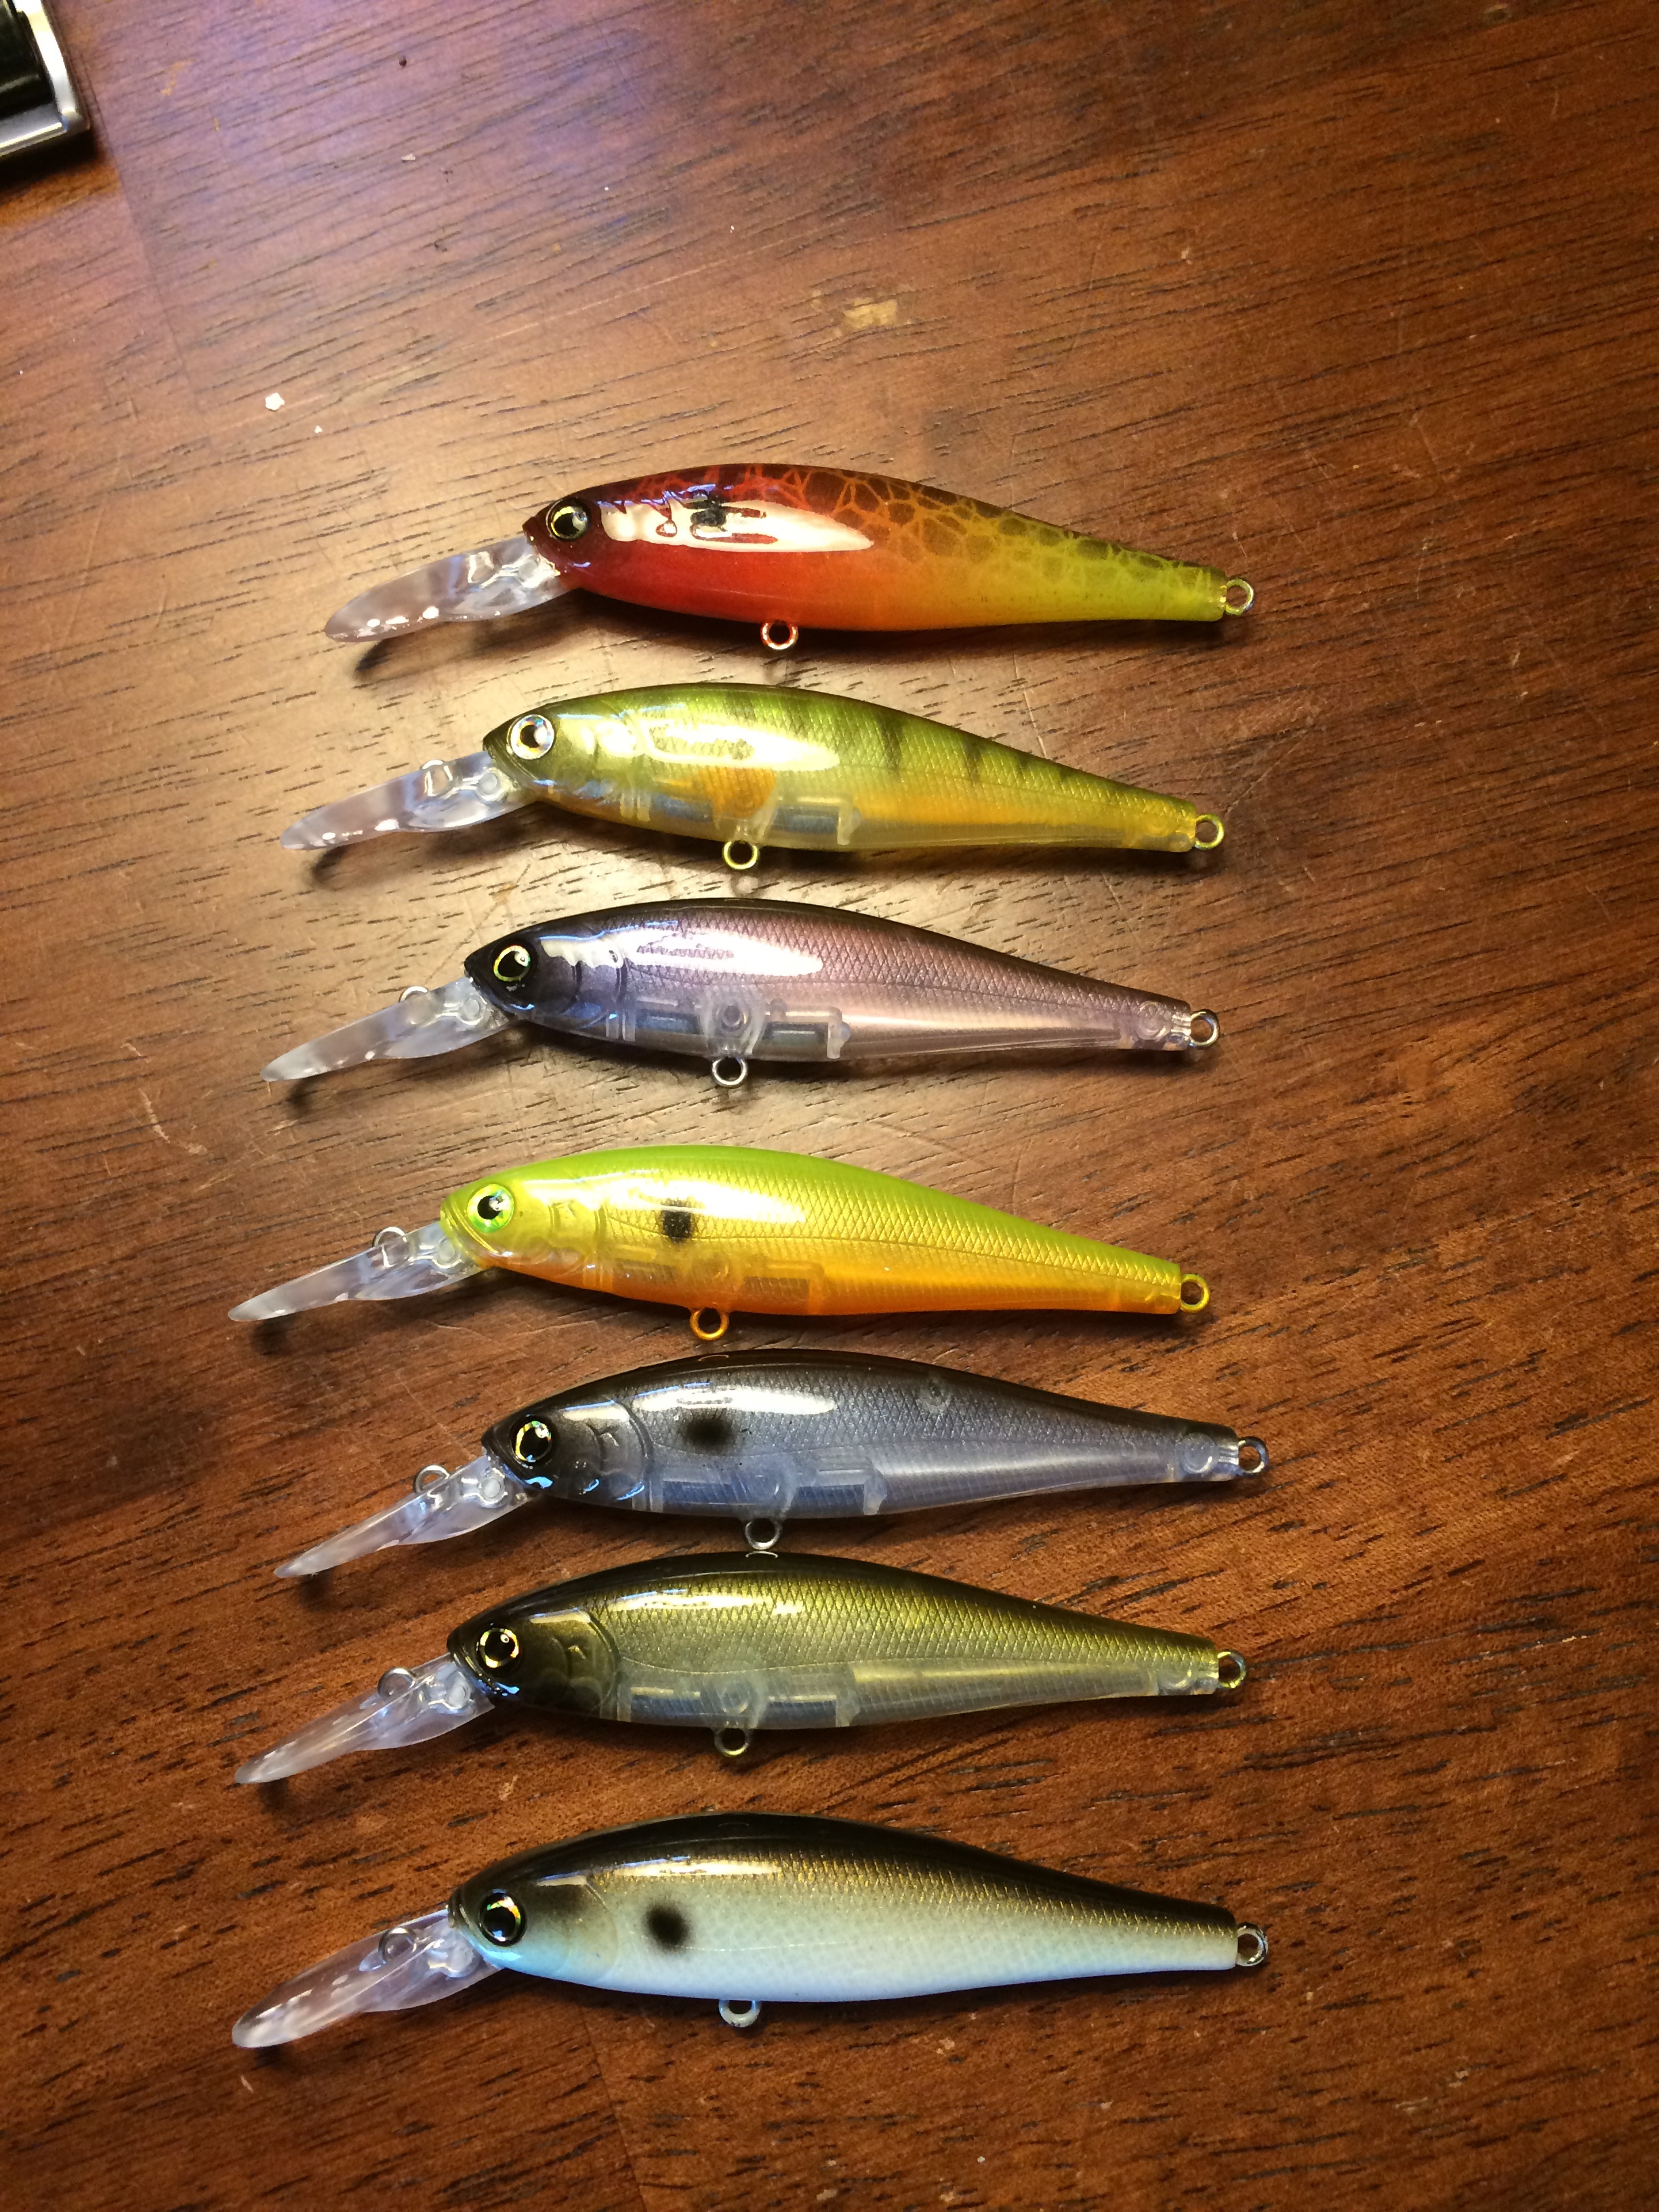 New paint lineup and a tiger trout - Tackle and Techniques - Lake